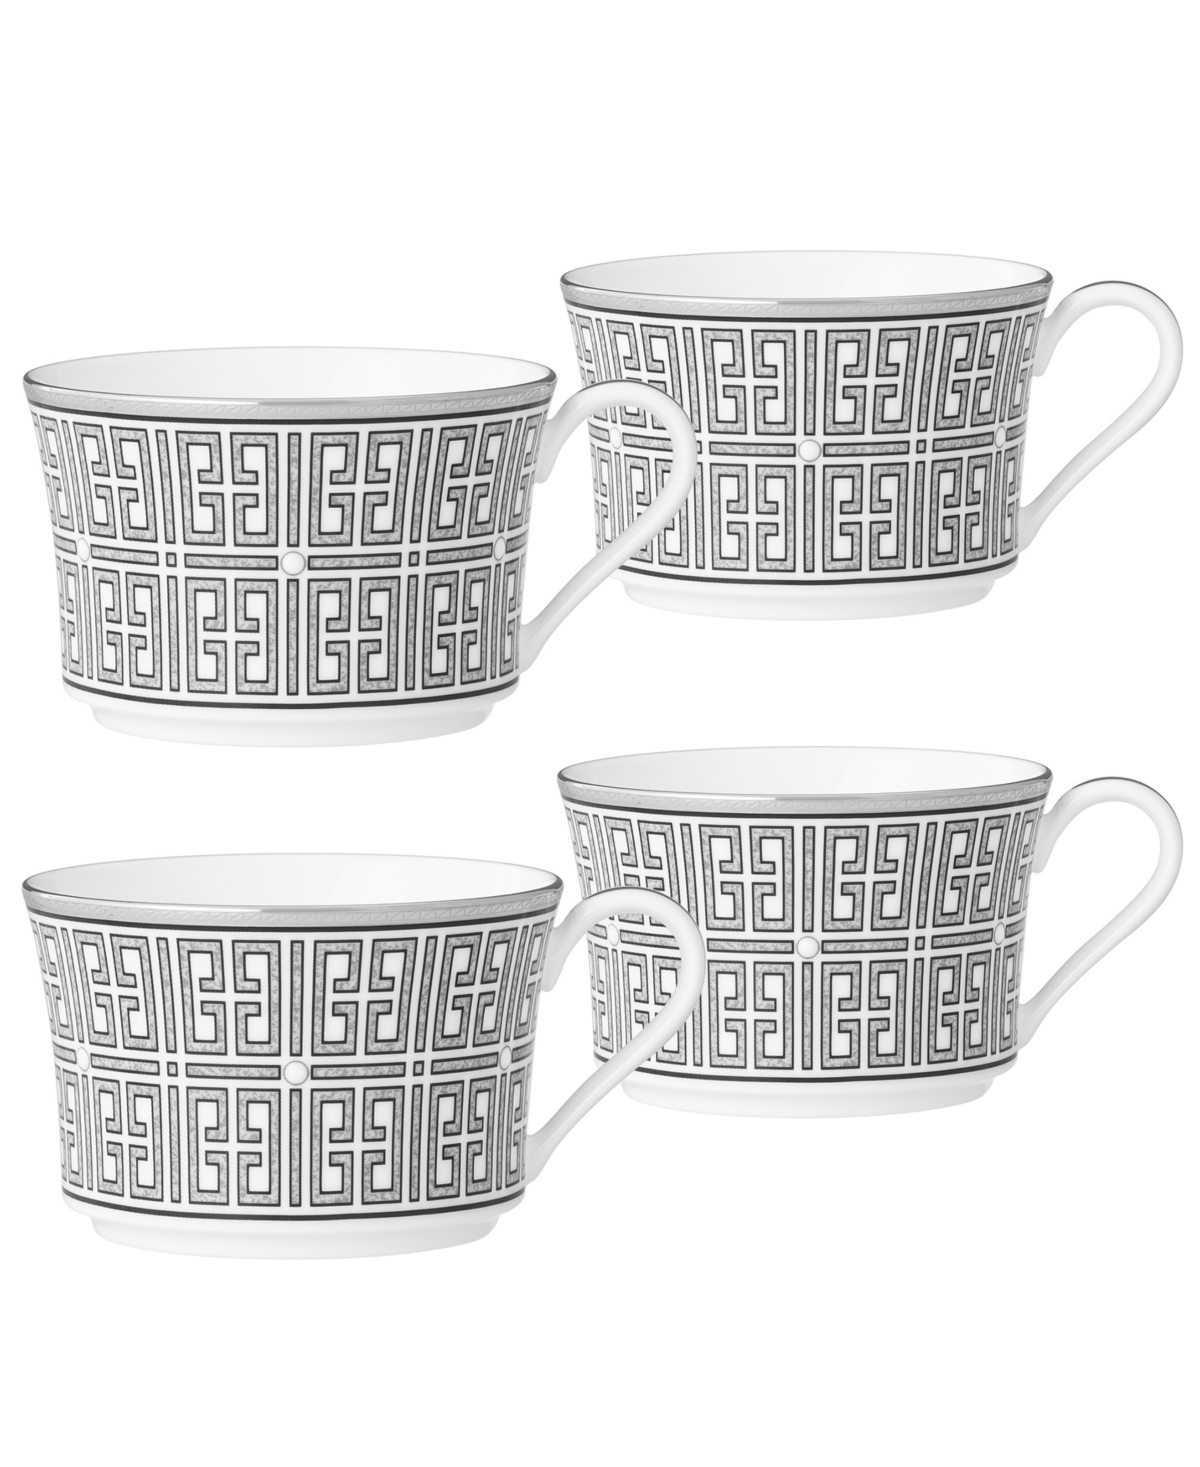 Noritake Infinity 4 Piece Cup Set, Service For 4 In Graphite